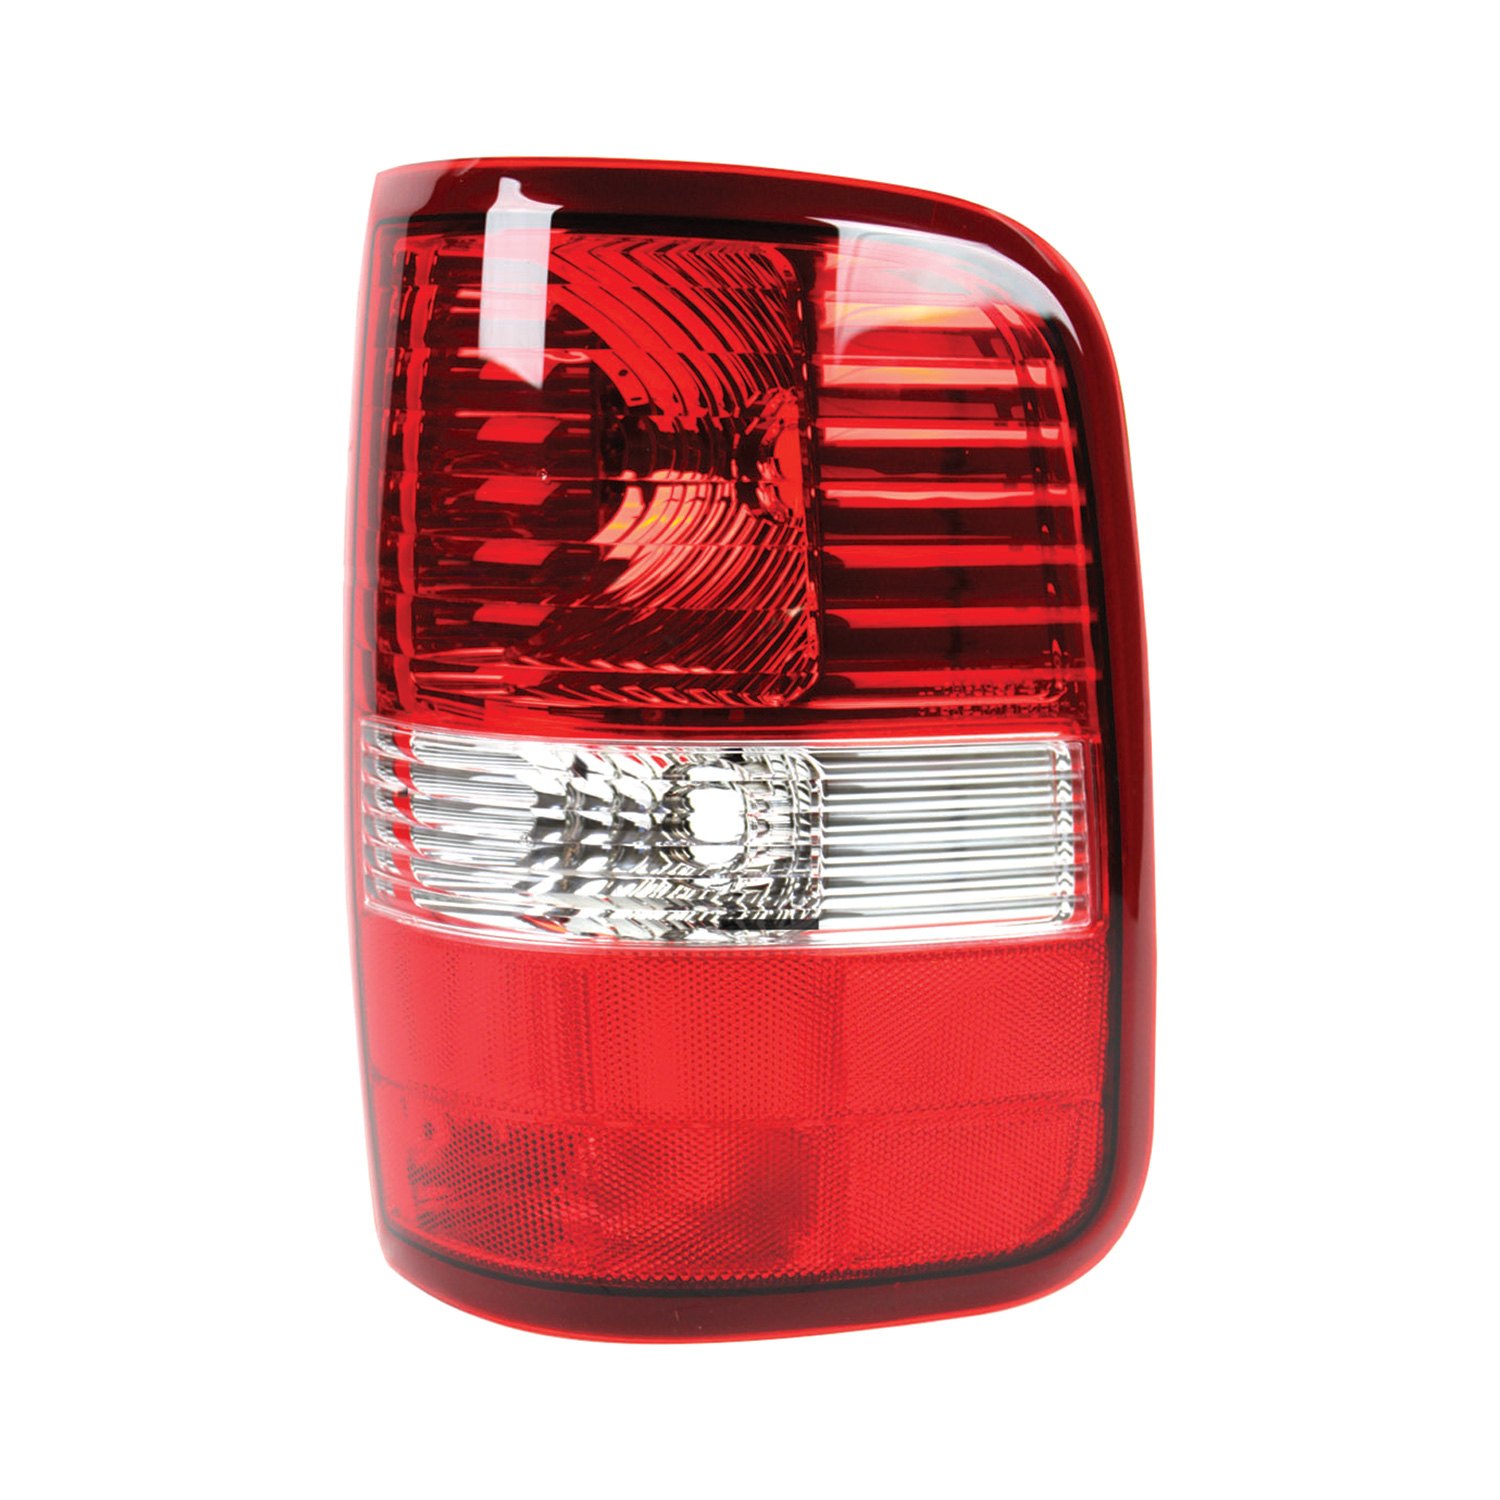 TYC 11-6337-01-9 Subaru Forester Right Replacement Tail Lamp